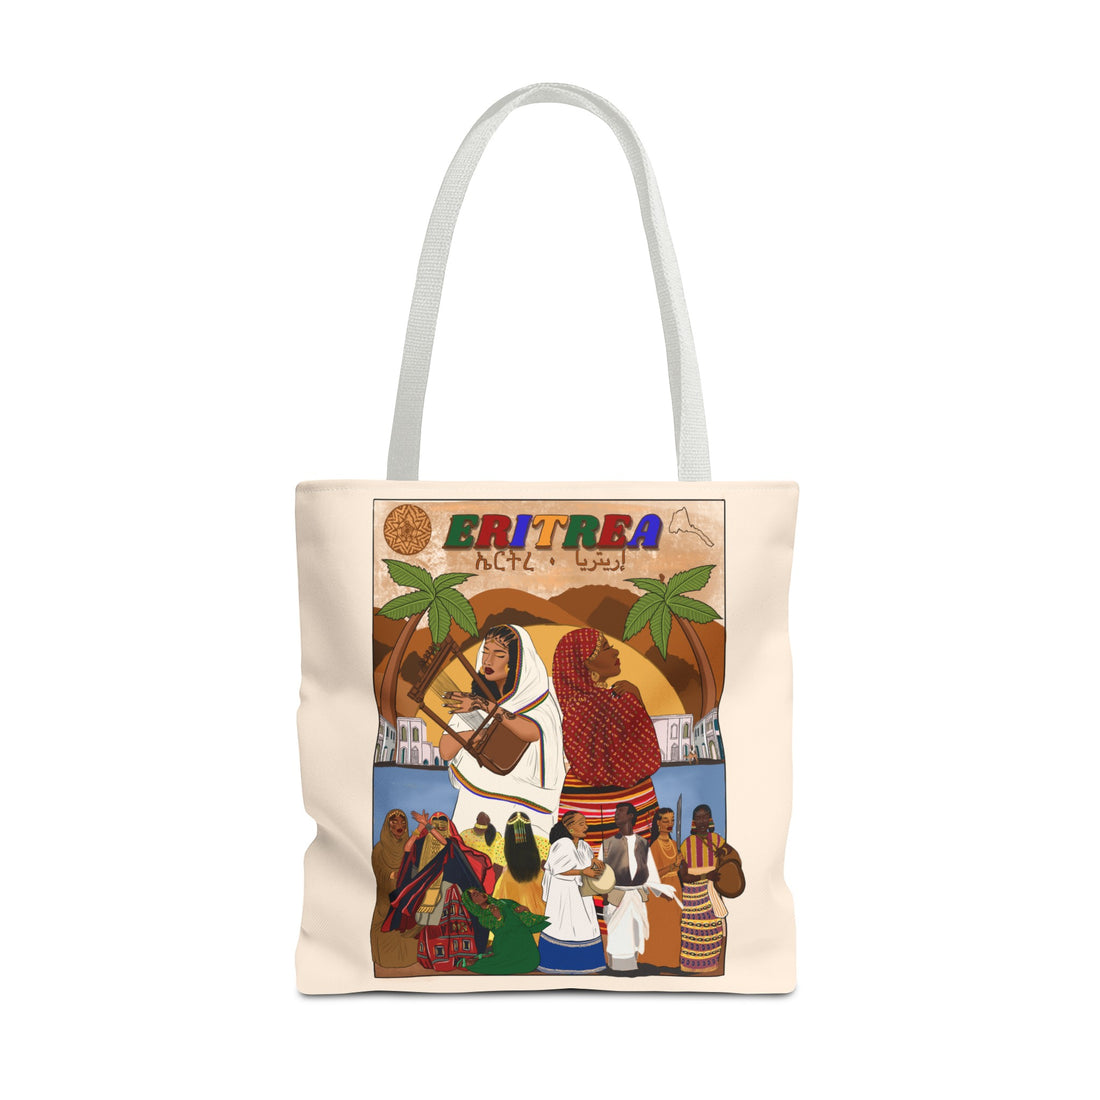 Eritrea Independence -  Tote Bag